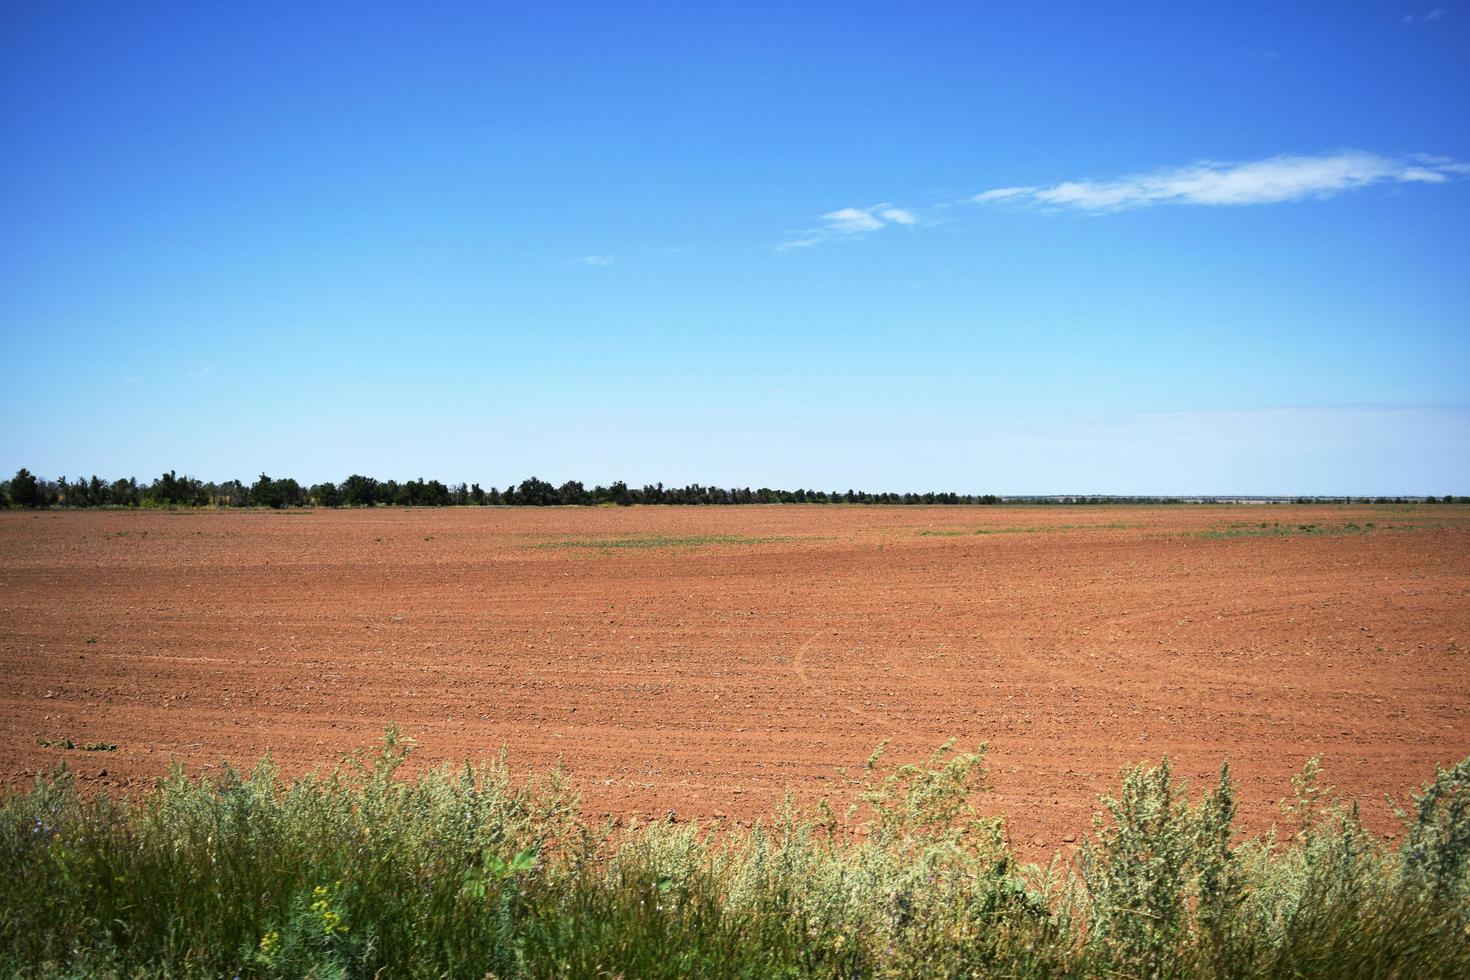 plowed field before sowing in sunny weather photo